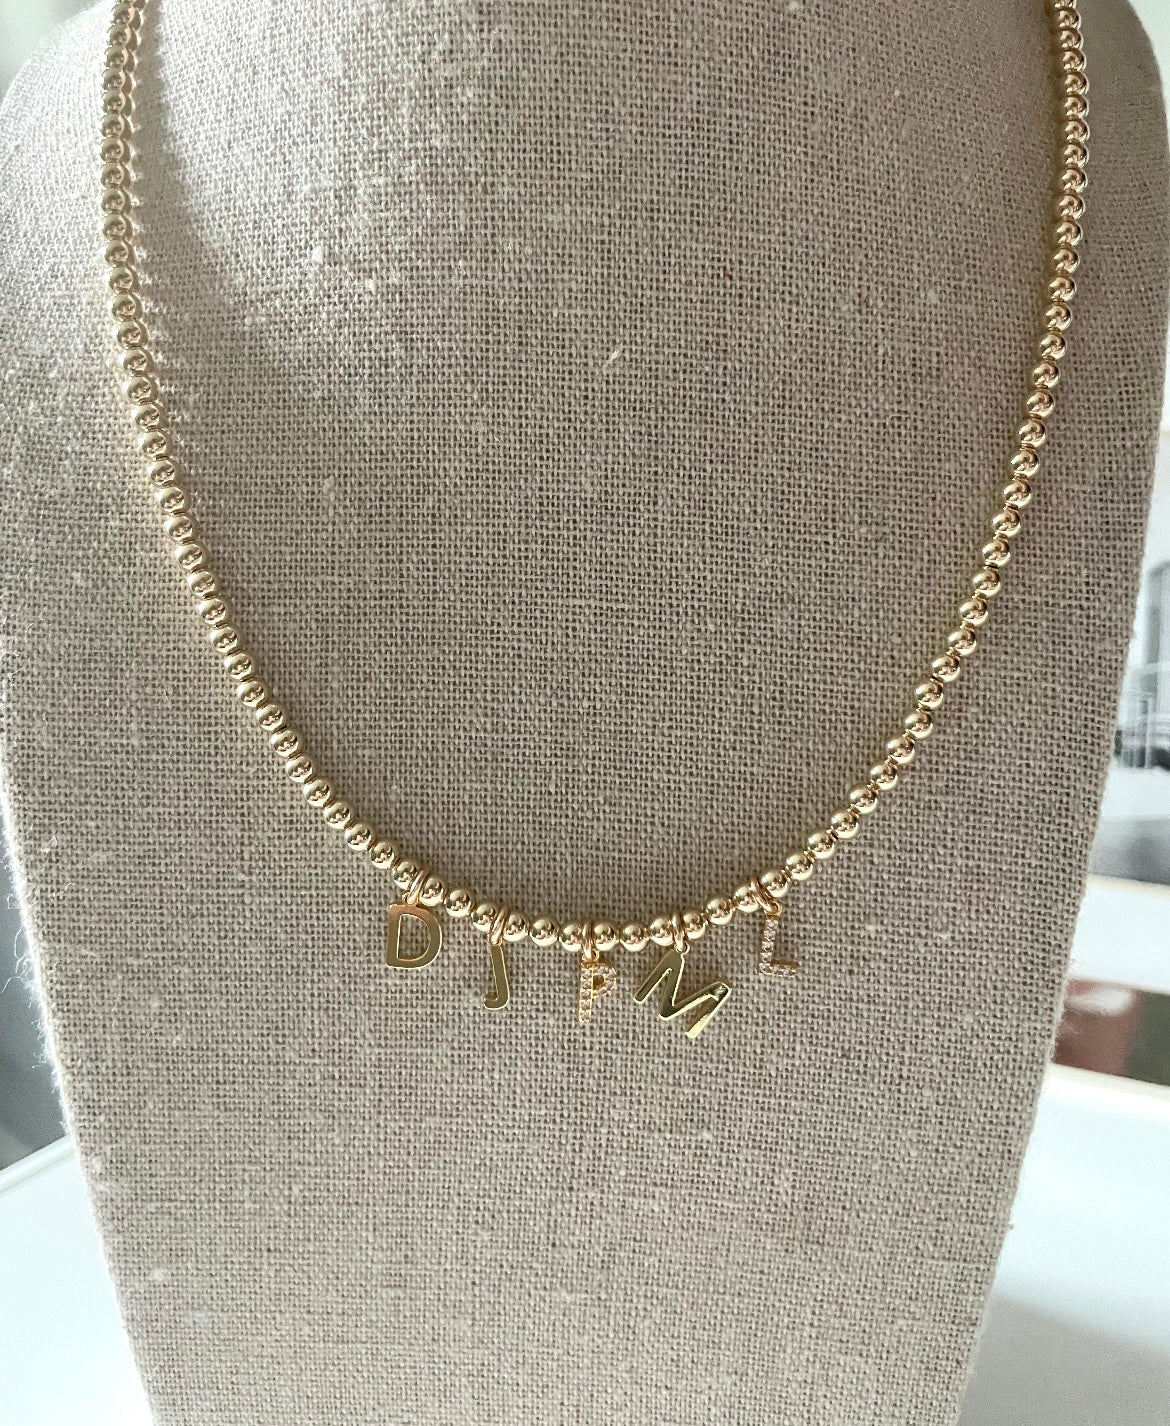 The LC Initial Gold Beaded Necklace